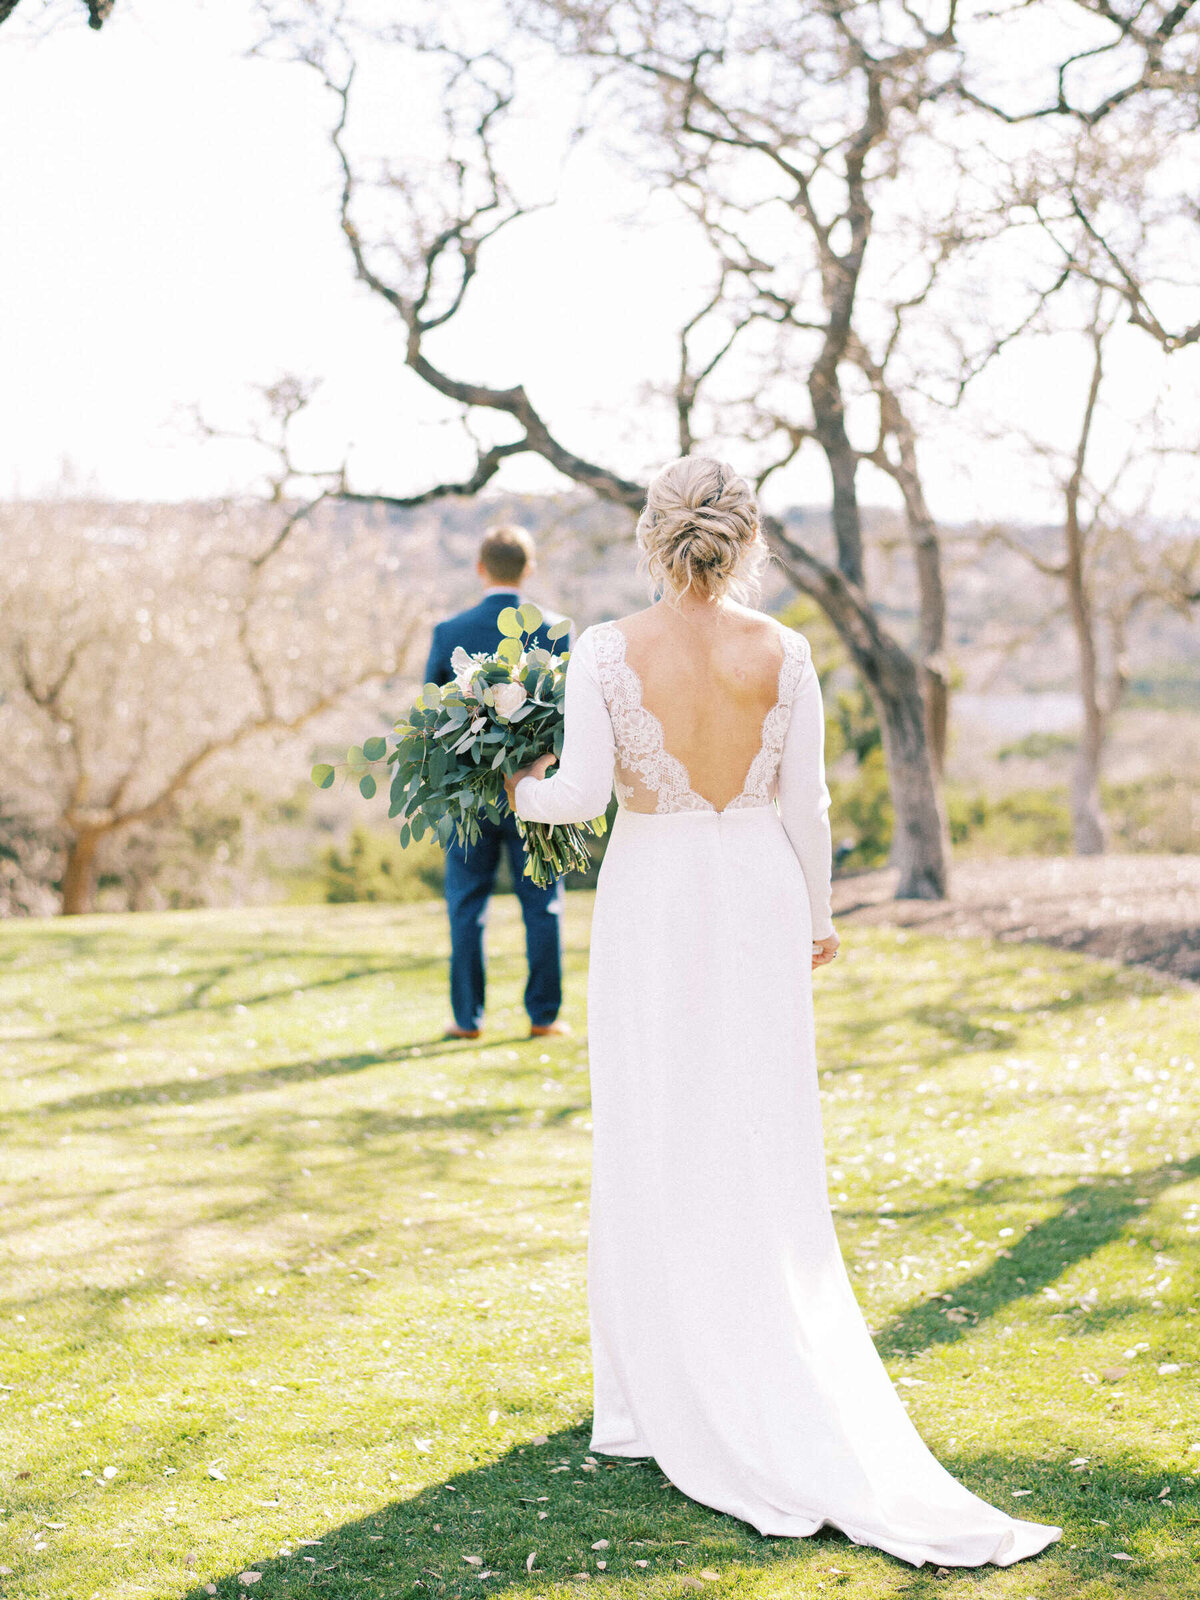 Central Texas bride walks up to her groom for the first look in Dripping Springs, Texas